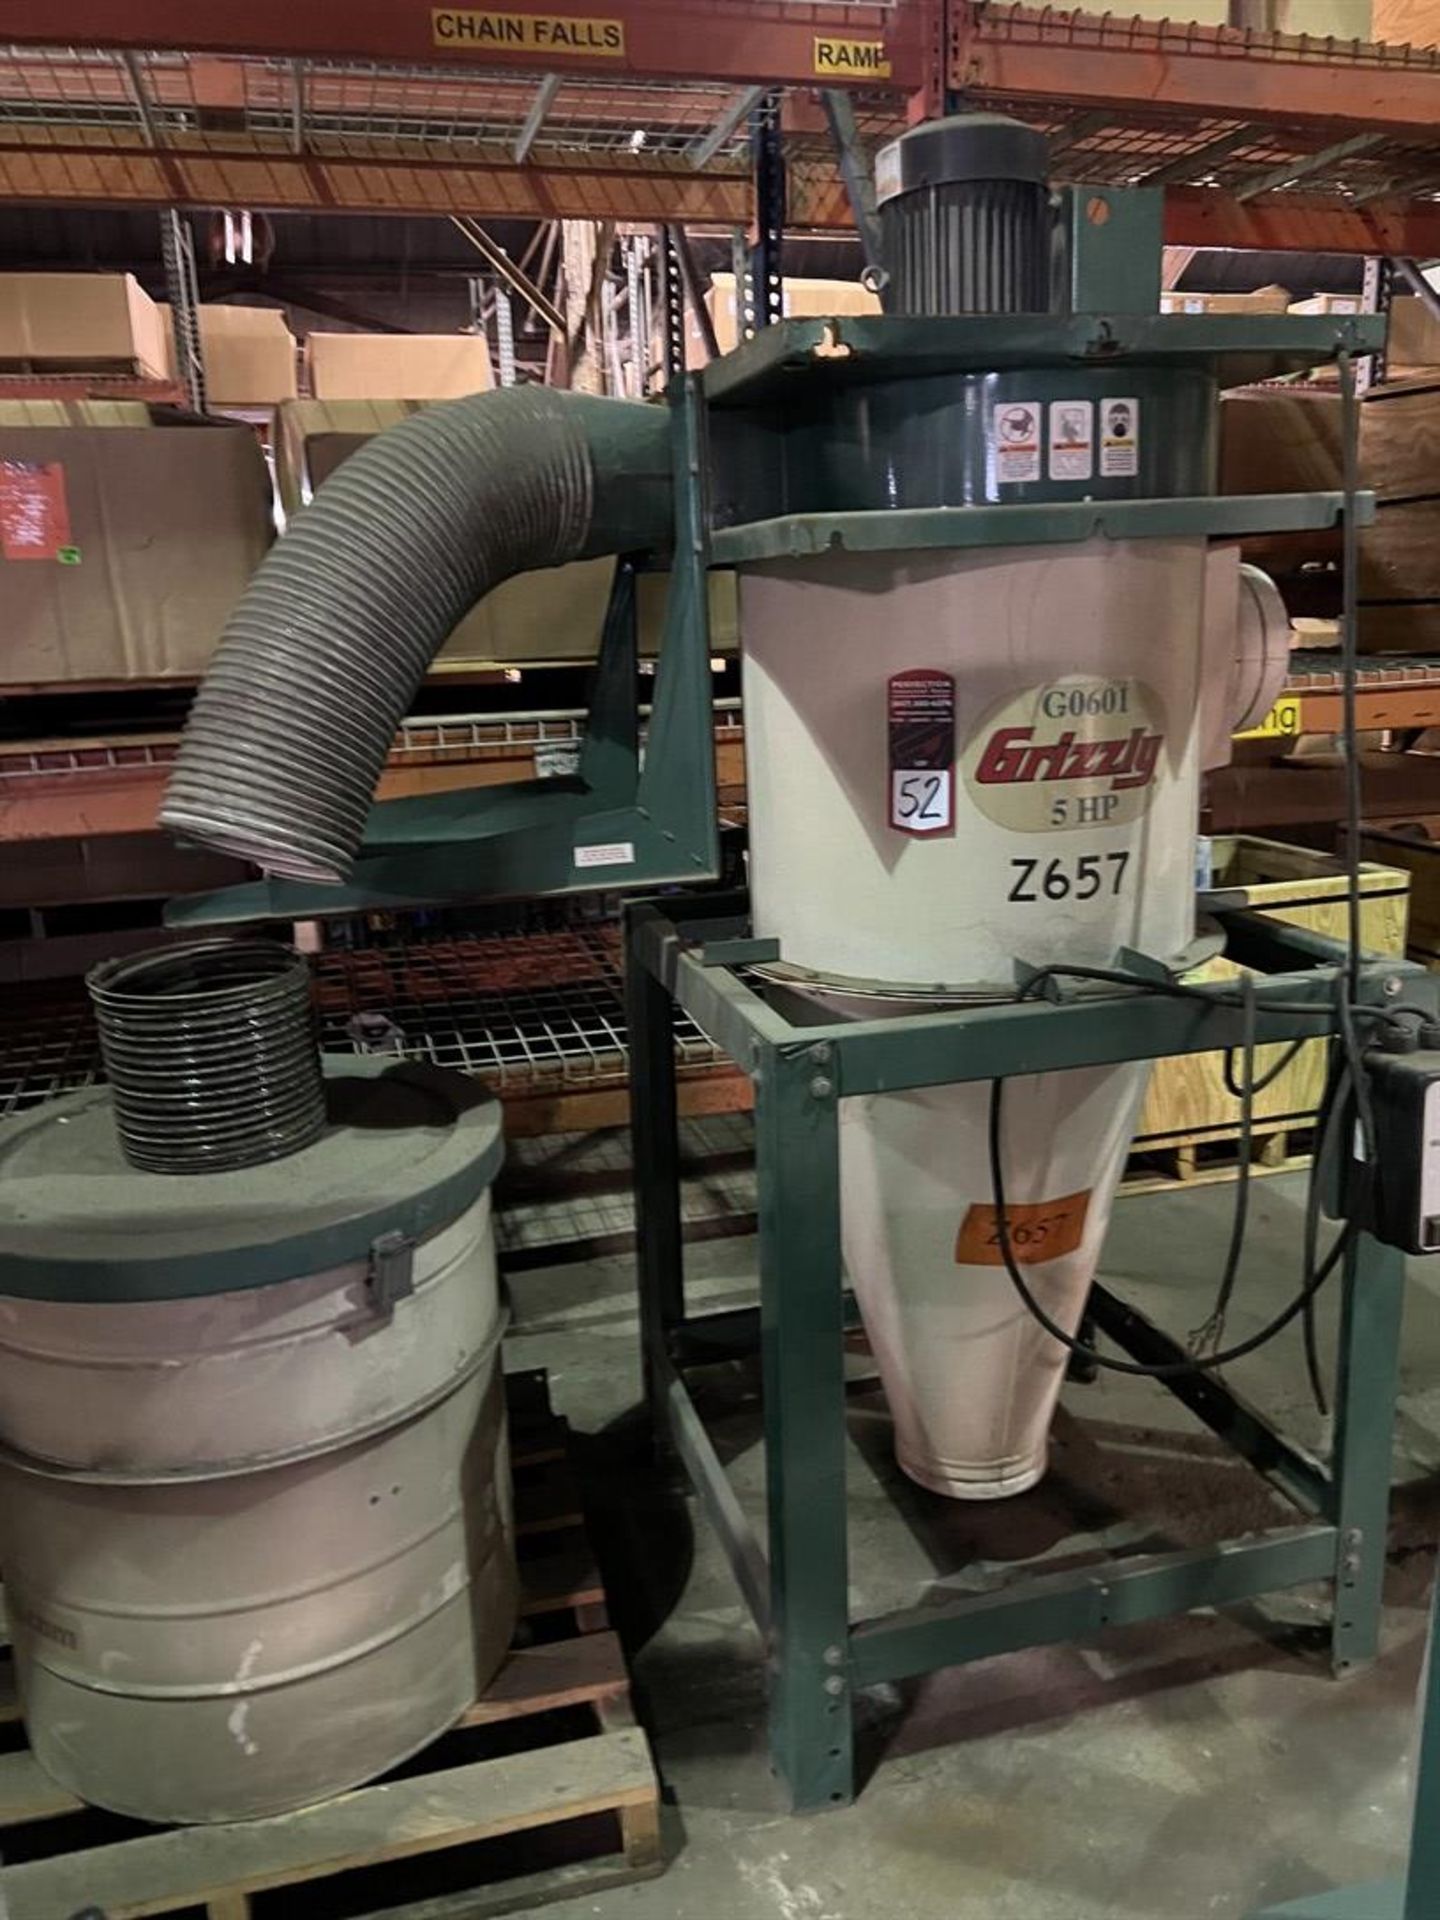 GRIZZLY G0601 5 HP Cyclone Dust Collector (Building 39)